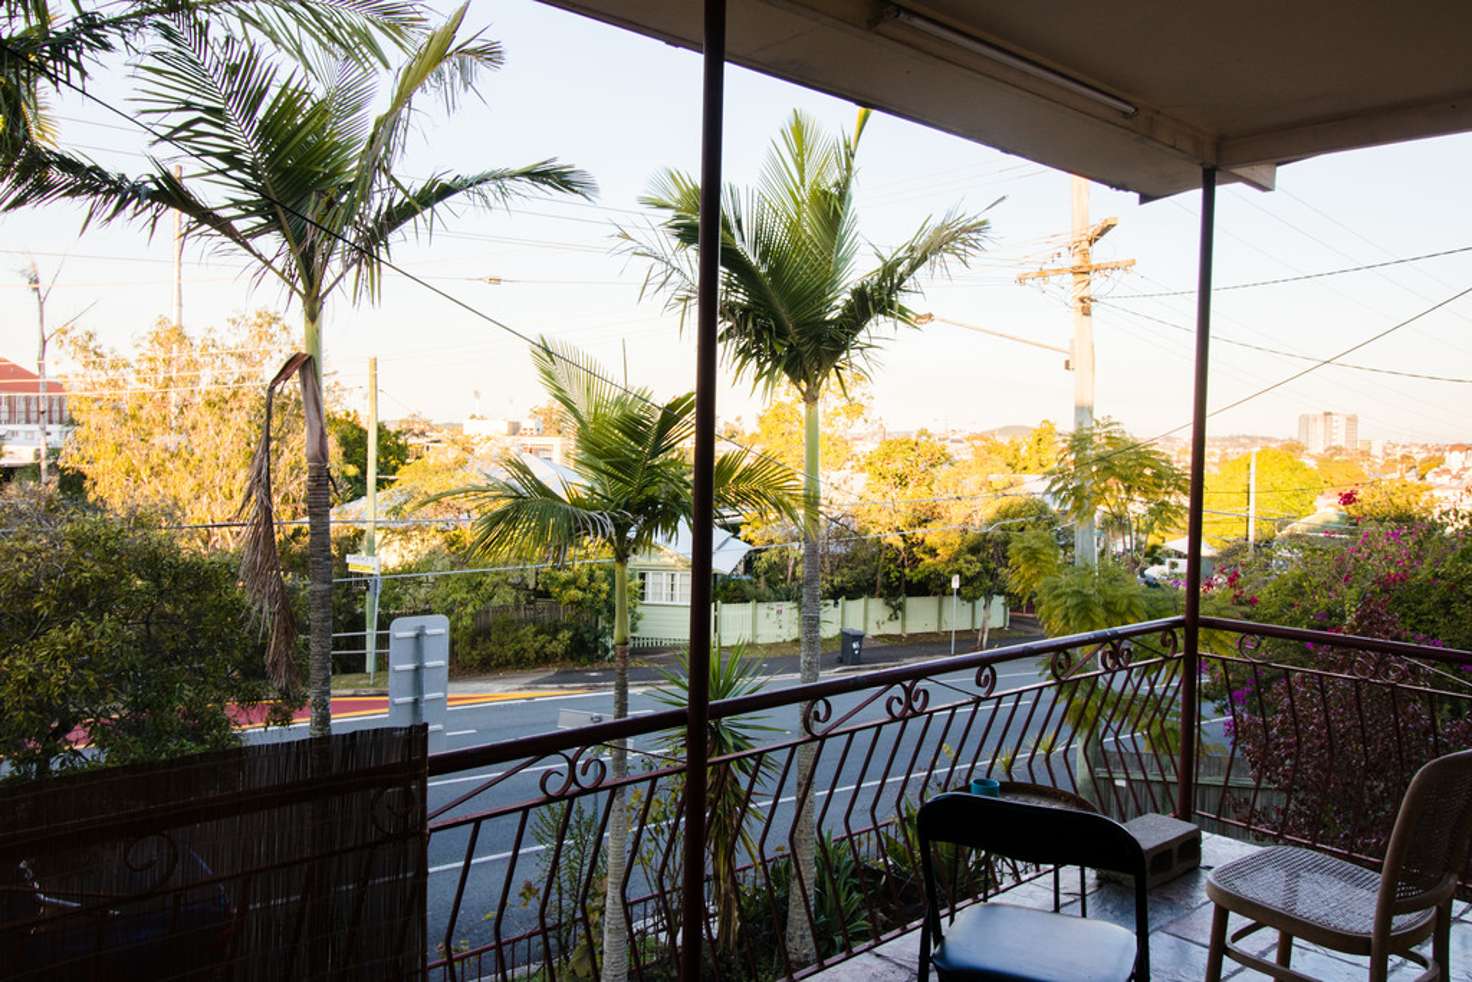 Main view of Homely house listing, 99 Stephens Road, South Brisbane QLD 4101